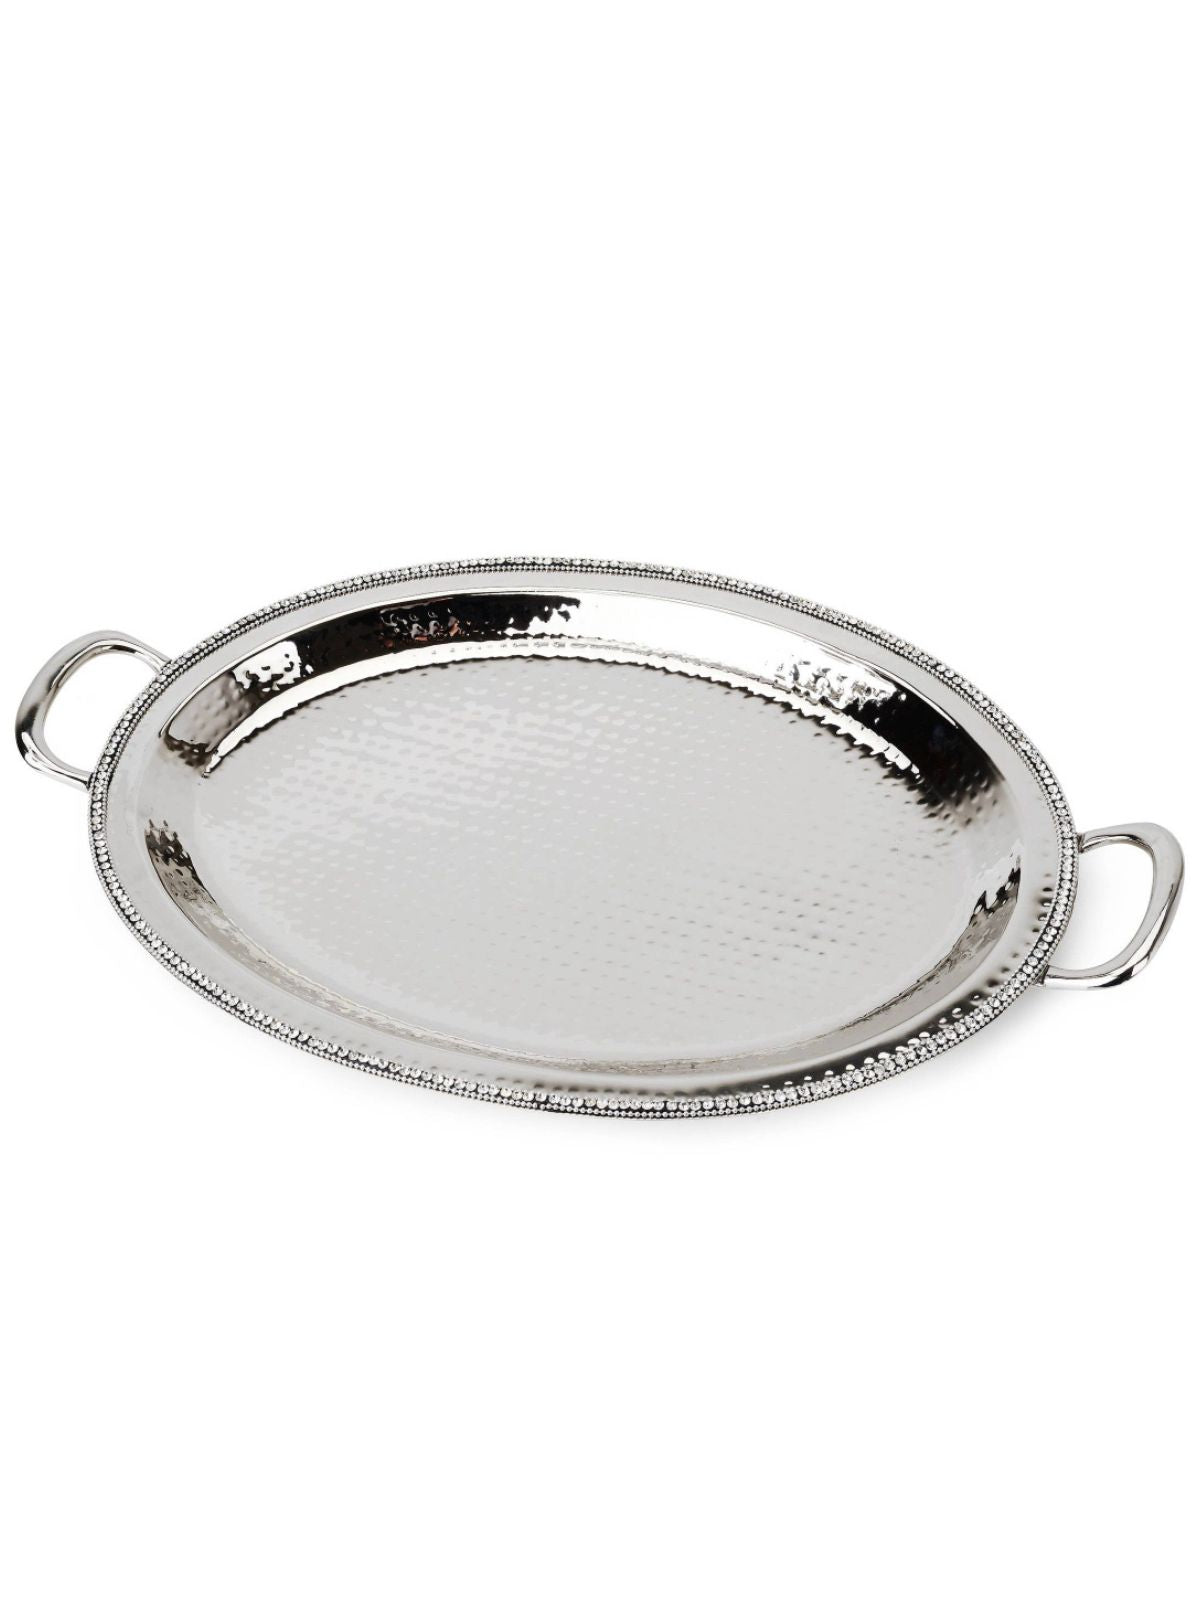 Stainless Steel Oval Tray with Diamond Crystal Edges.